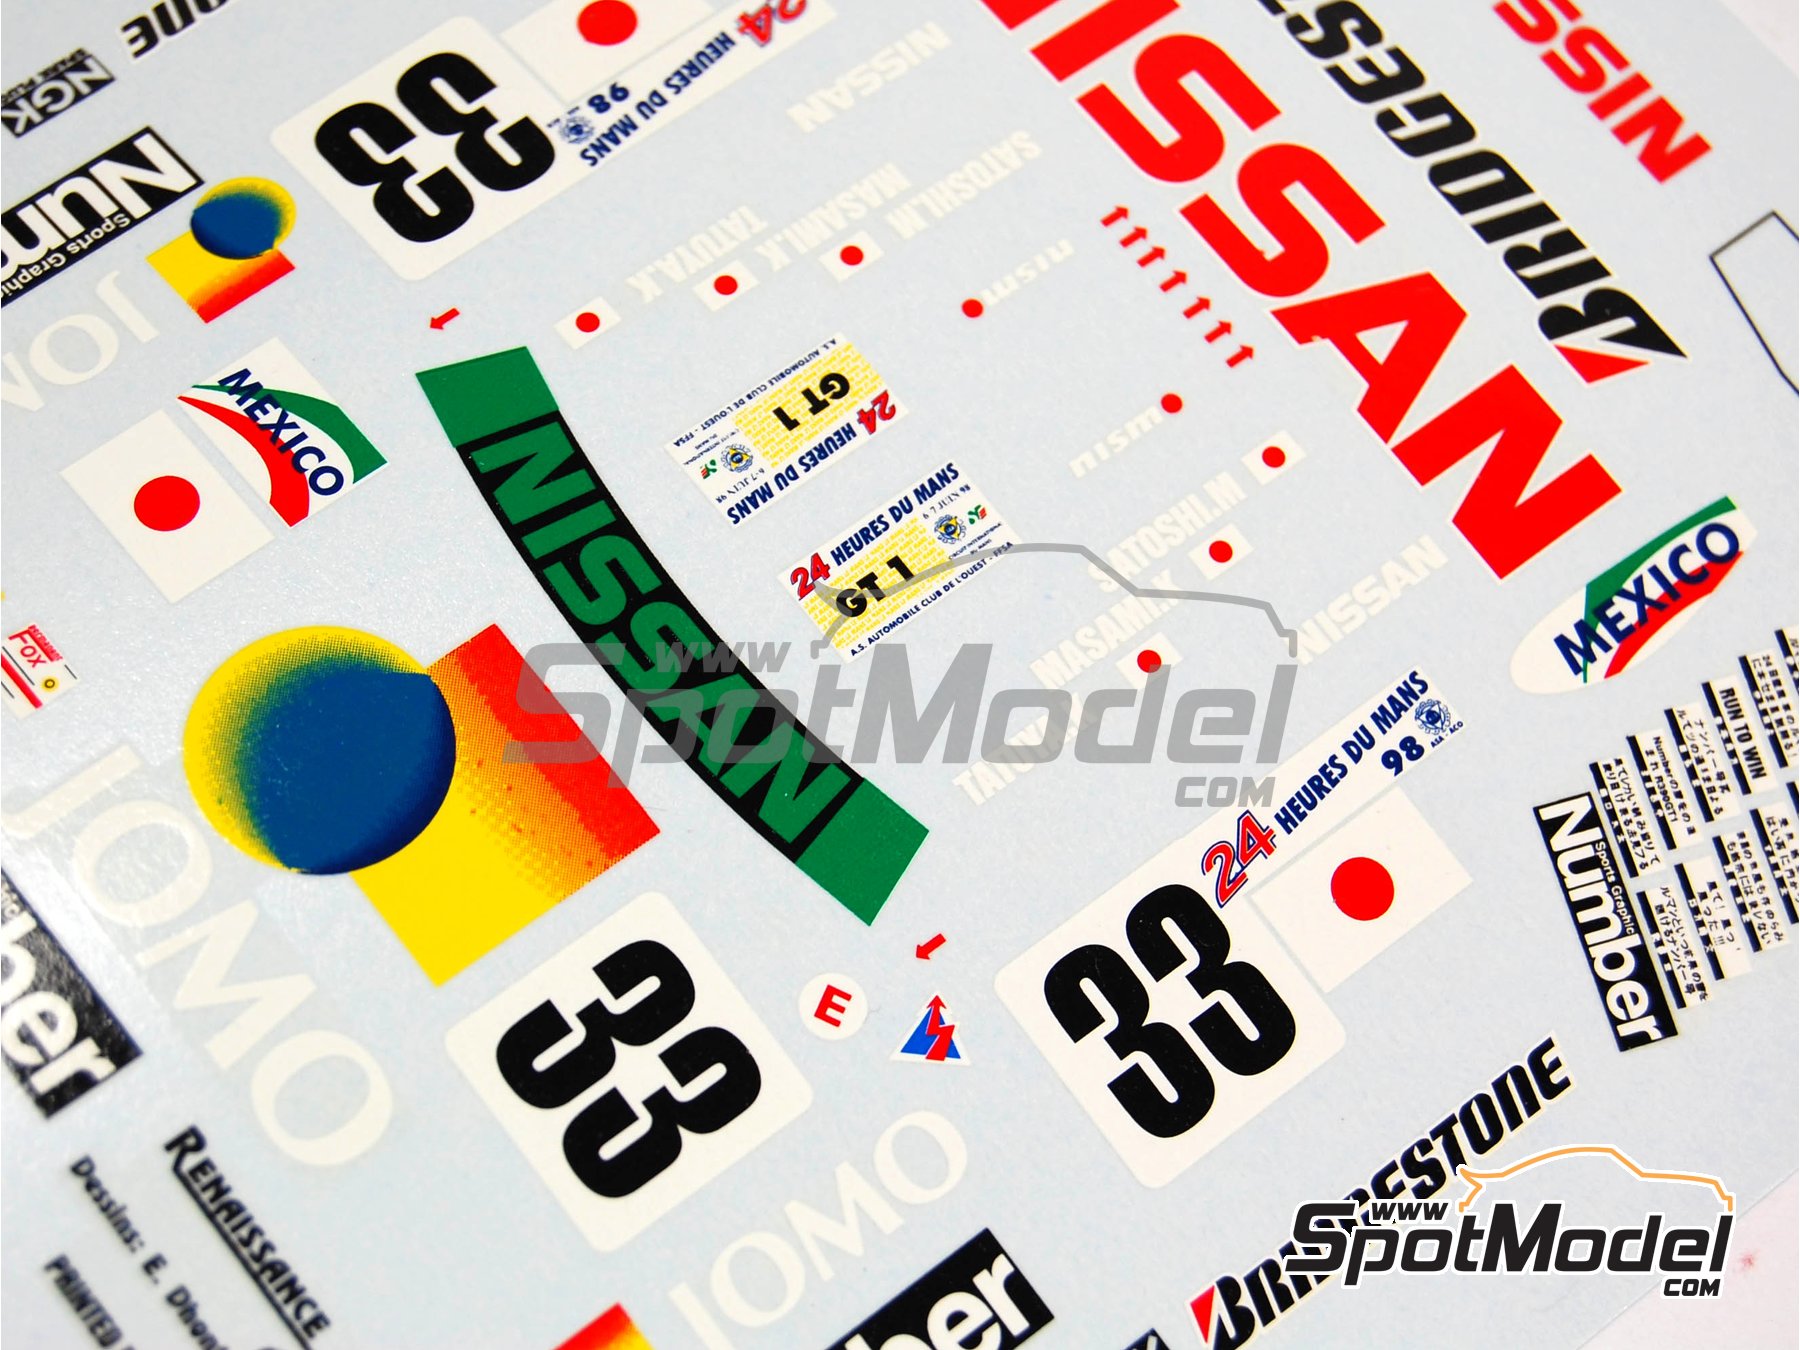 Nissan R390 GT1 sponsored by Jomo - 24 Hours Le Mans 1998. Marking / livery  in 1/24 scale manufactured by Renaissance Models (ref. TK24-081, also TK24